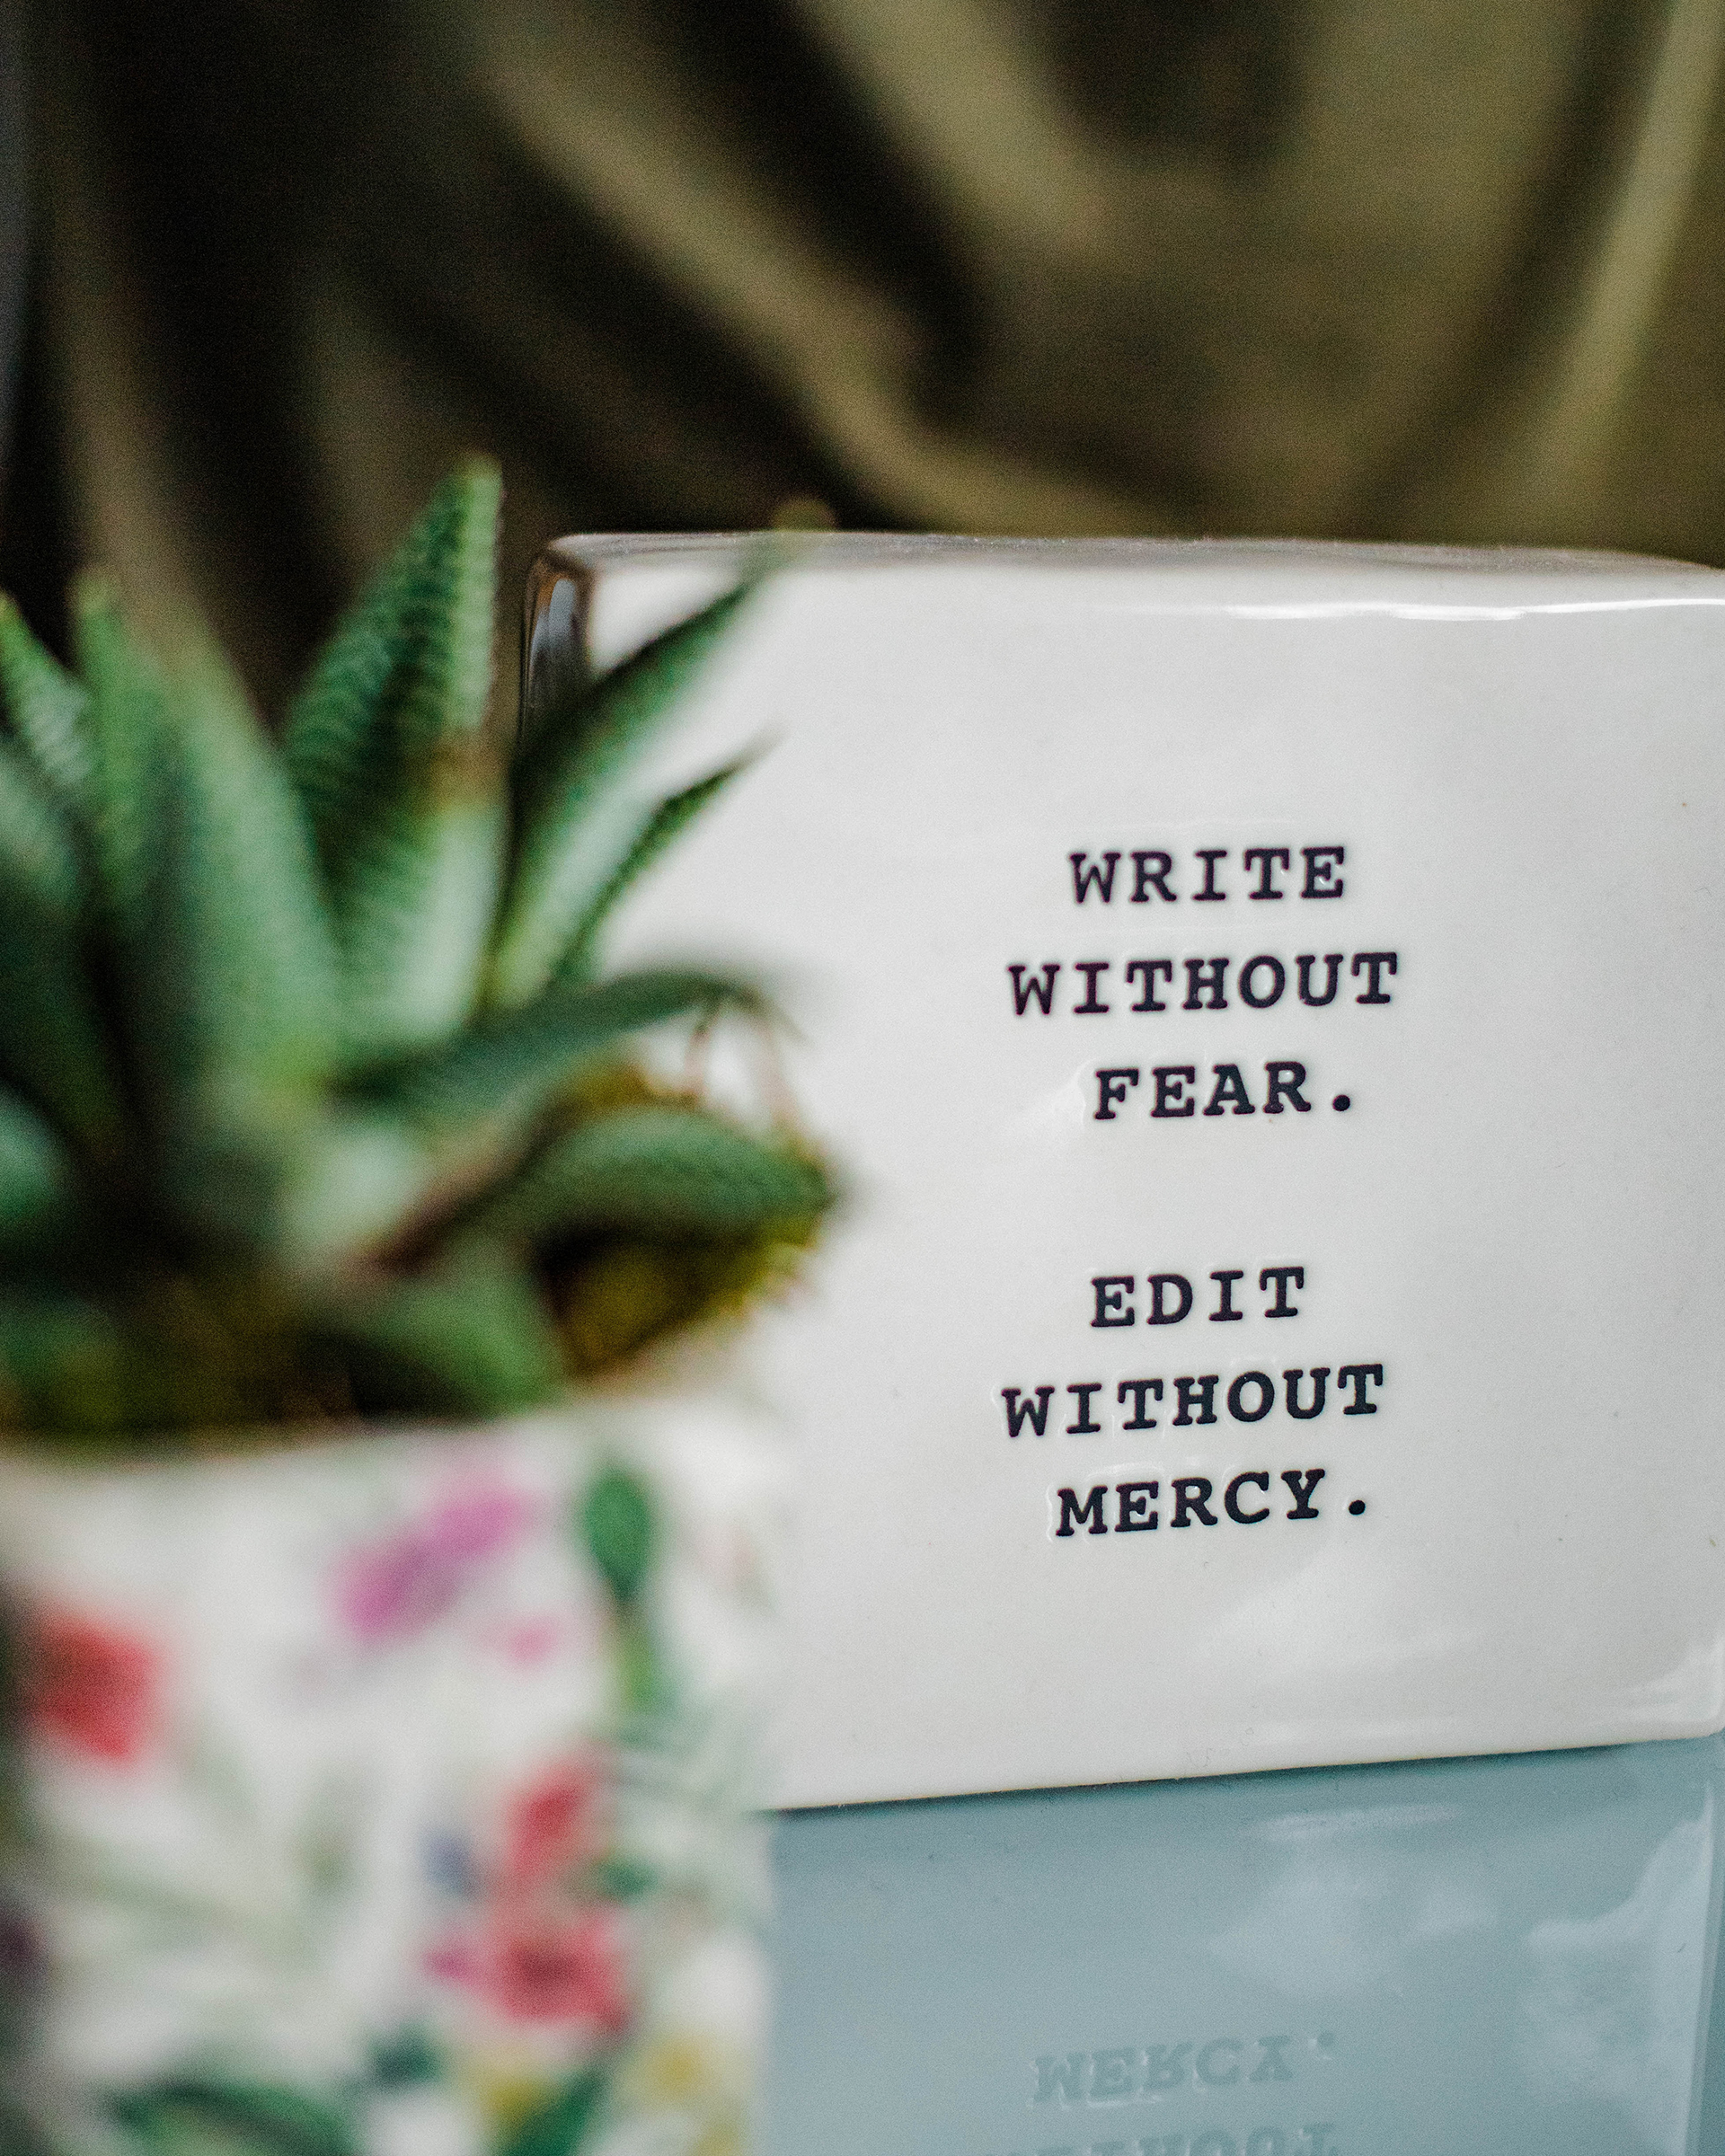 Ceramic sign that says "write without fear. edit without mercy." with a succulent in the foreground.